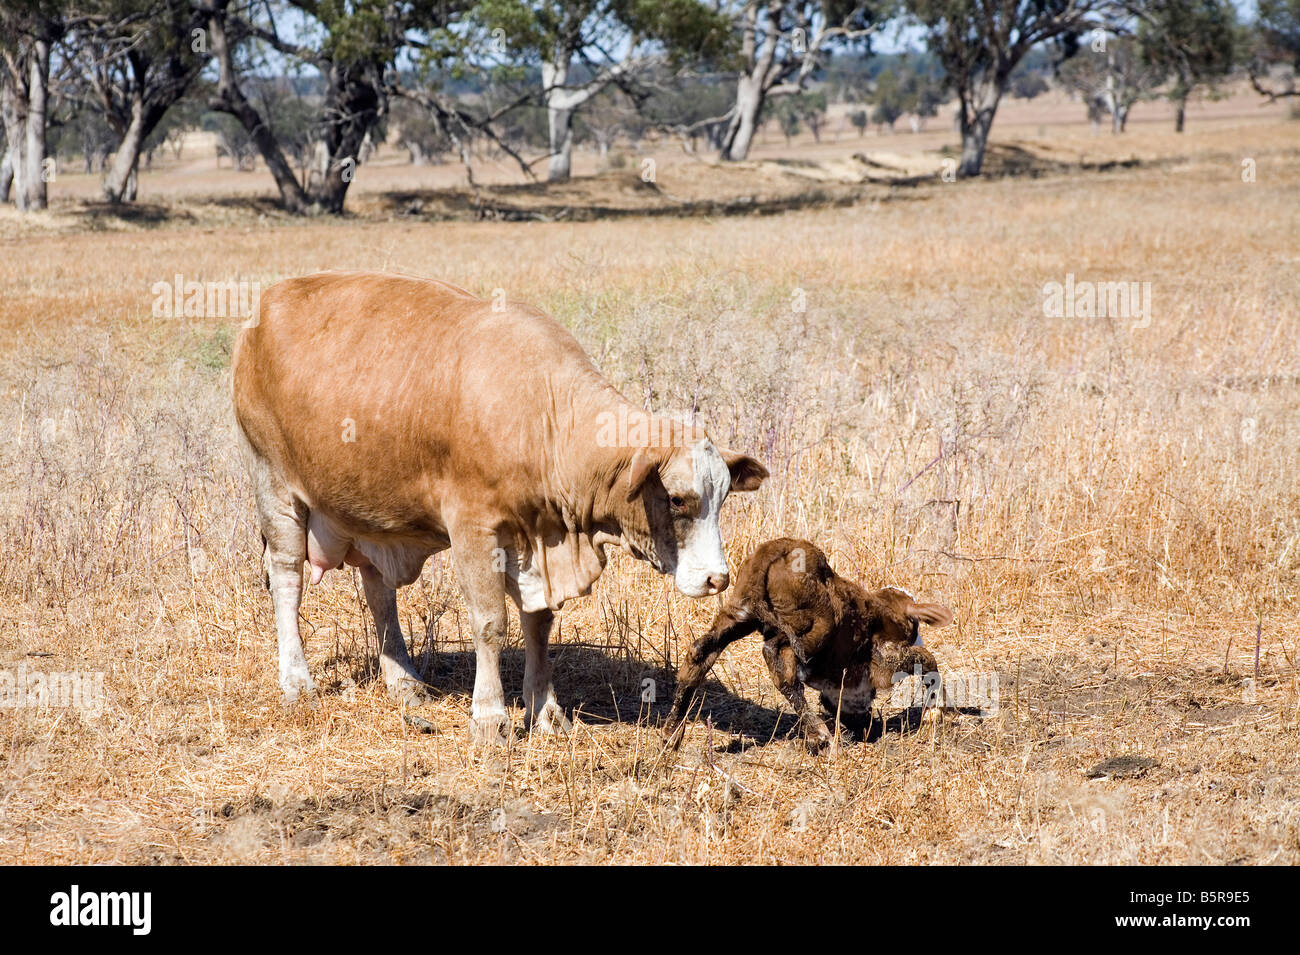 A female cow with her newborn calf The mother is watching as the calf attempts to stand for the first time Stock Photo